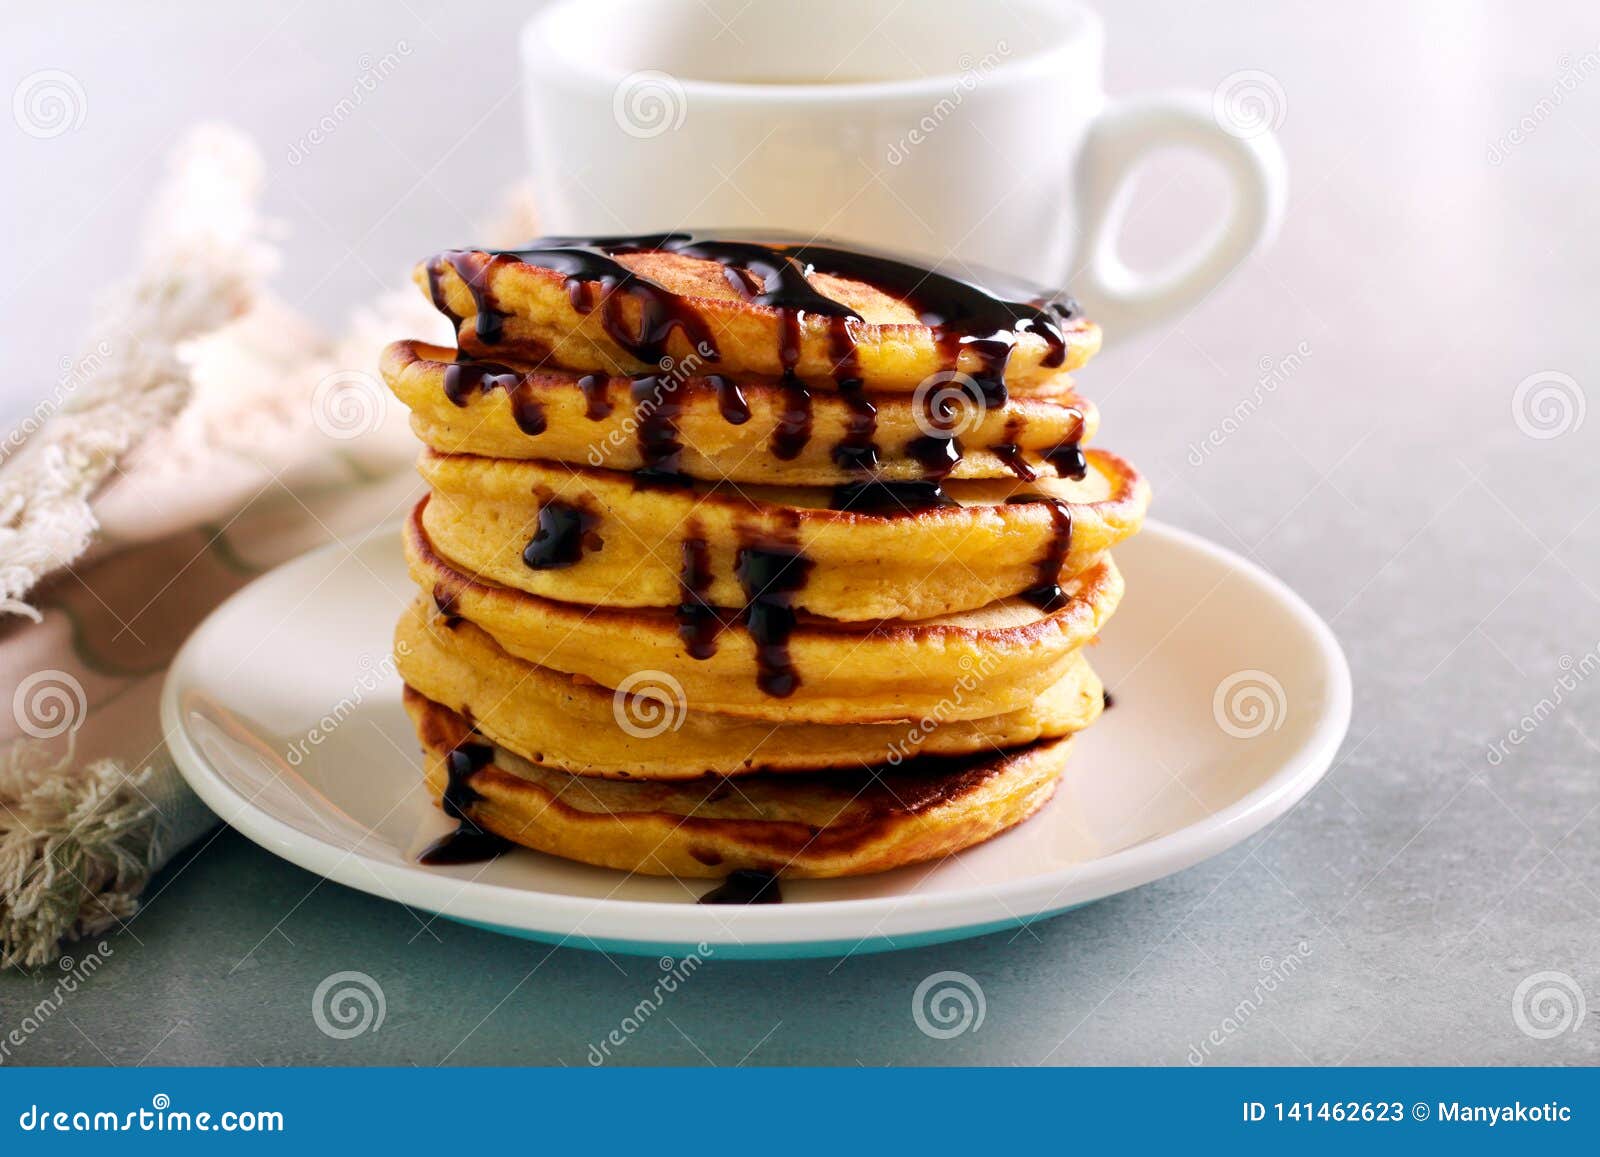 Pile of Pancakes with Chocolate Syrup Stock Image - Image of snack ...